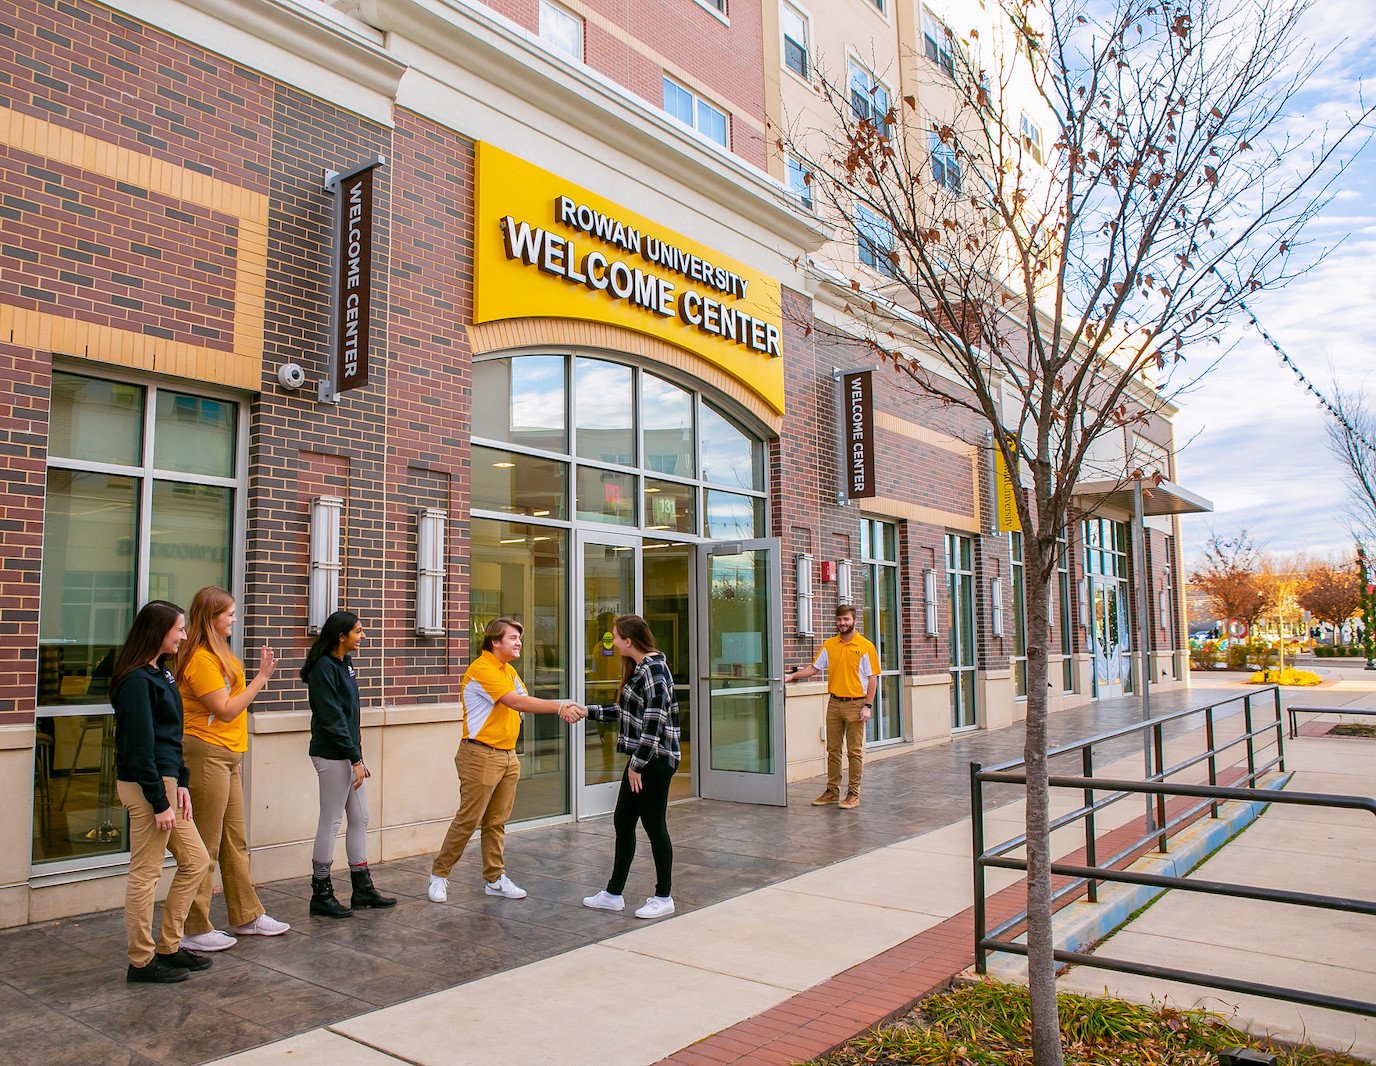 An image of Rowan University's Welcome Center with students outside.